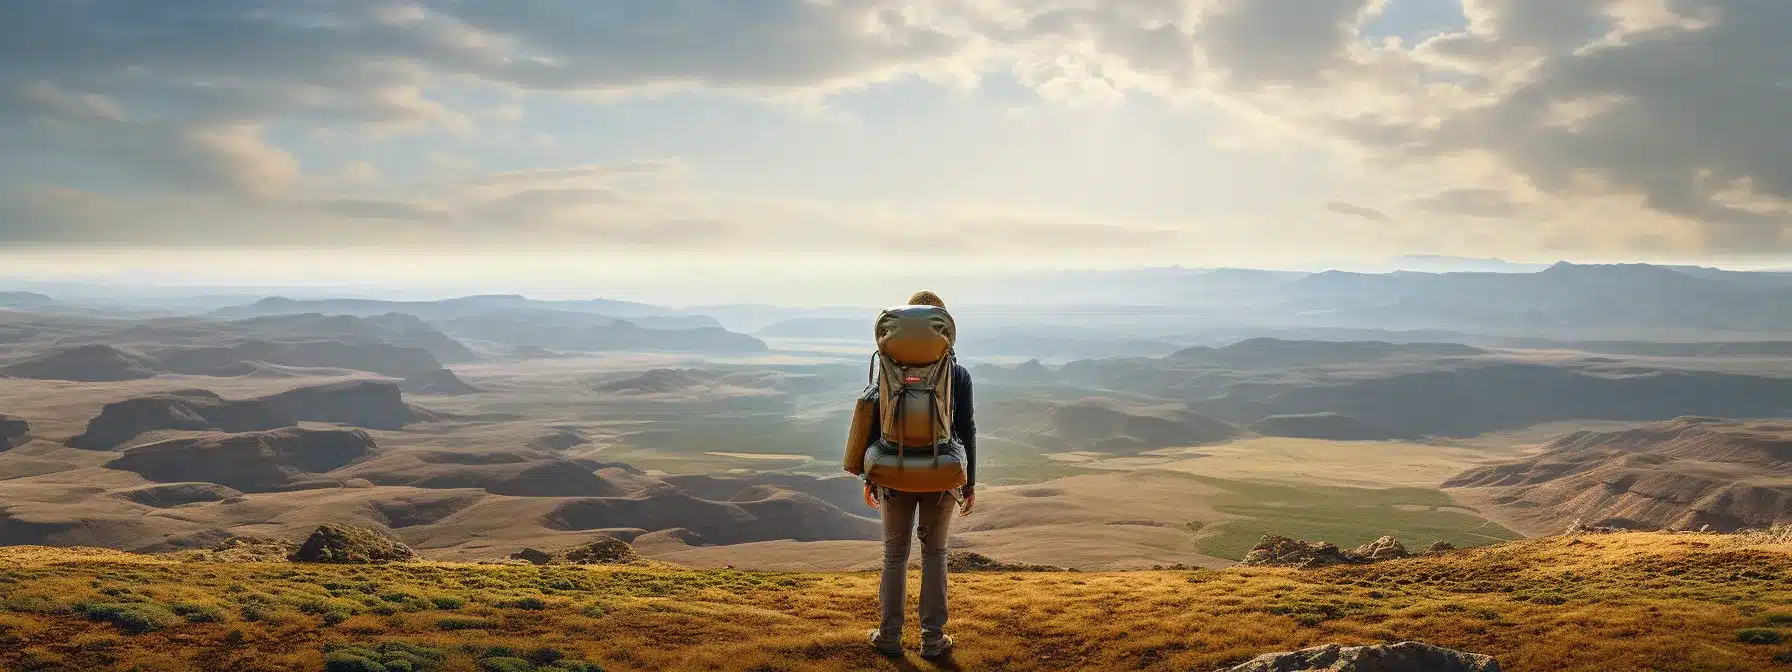 An Adventurer Standing At The Edge Of A Vast Landscape, Preparing To Embark On A Quest, With The Target Market Portrayed As A Fabled Land In The Distance.